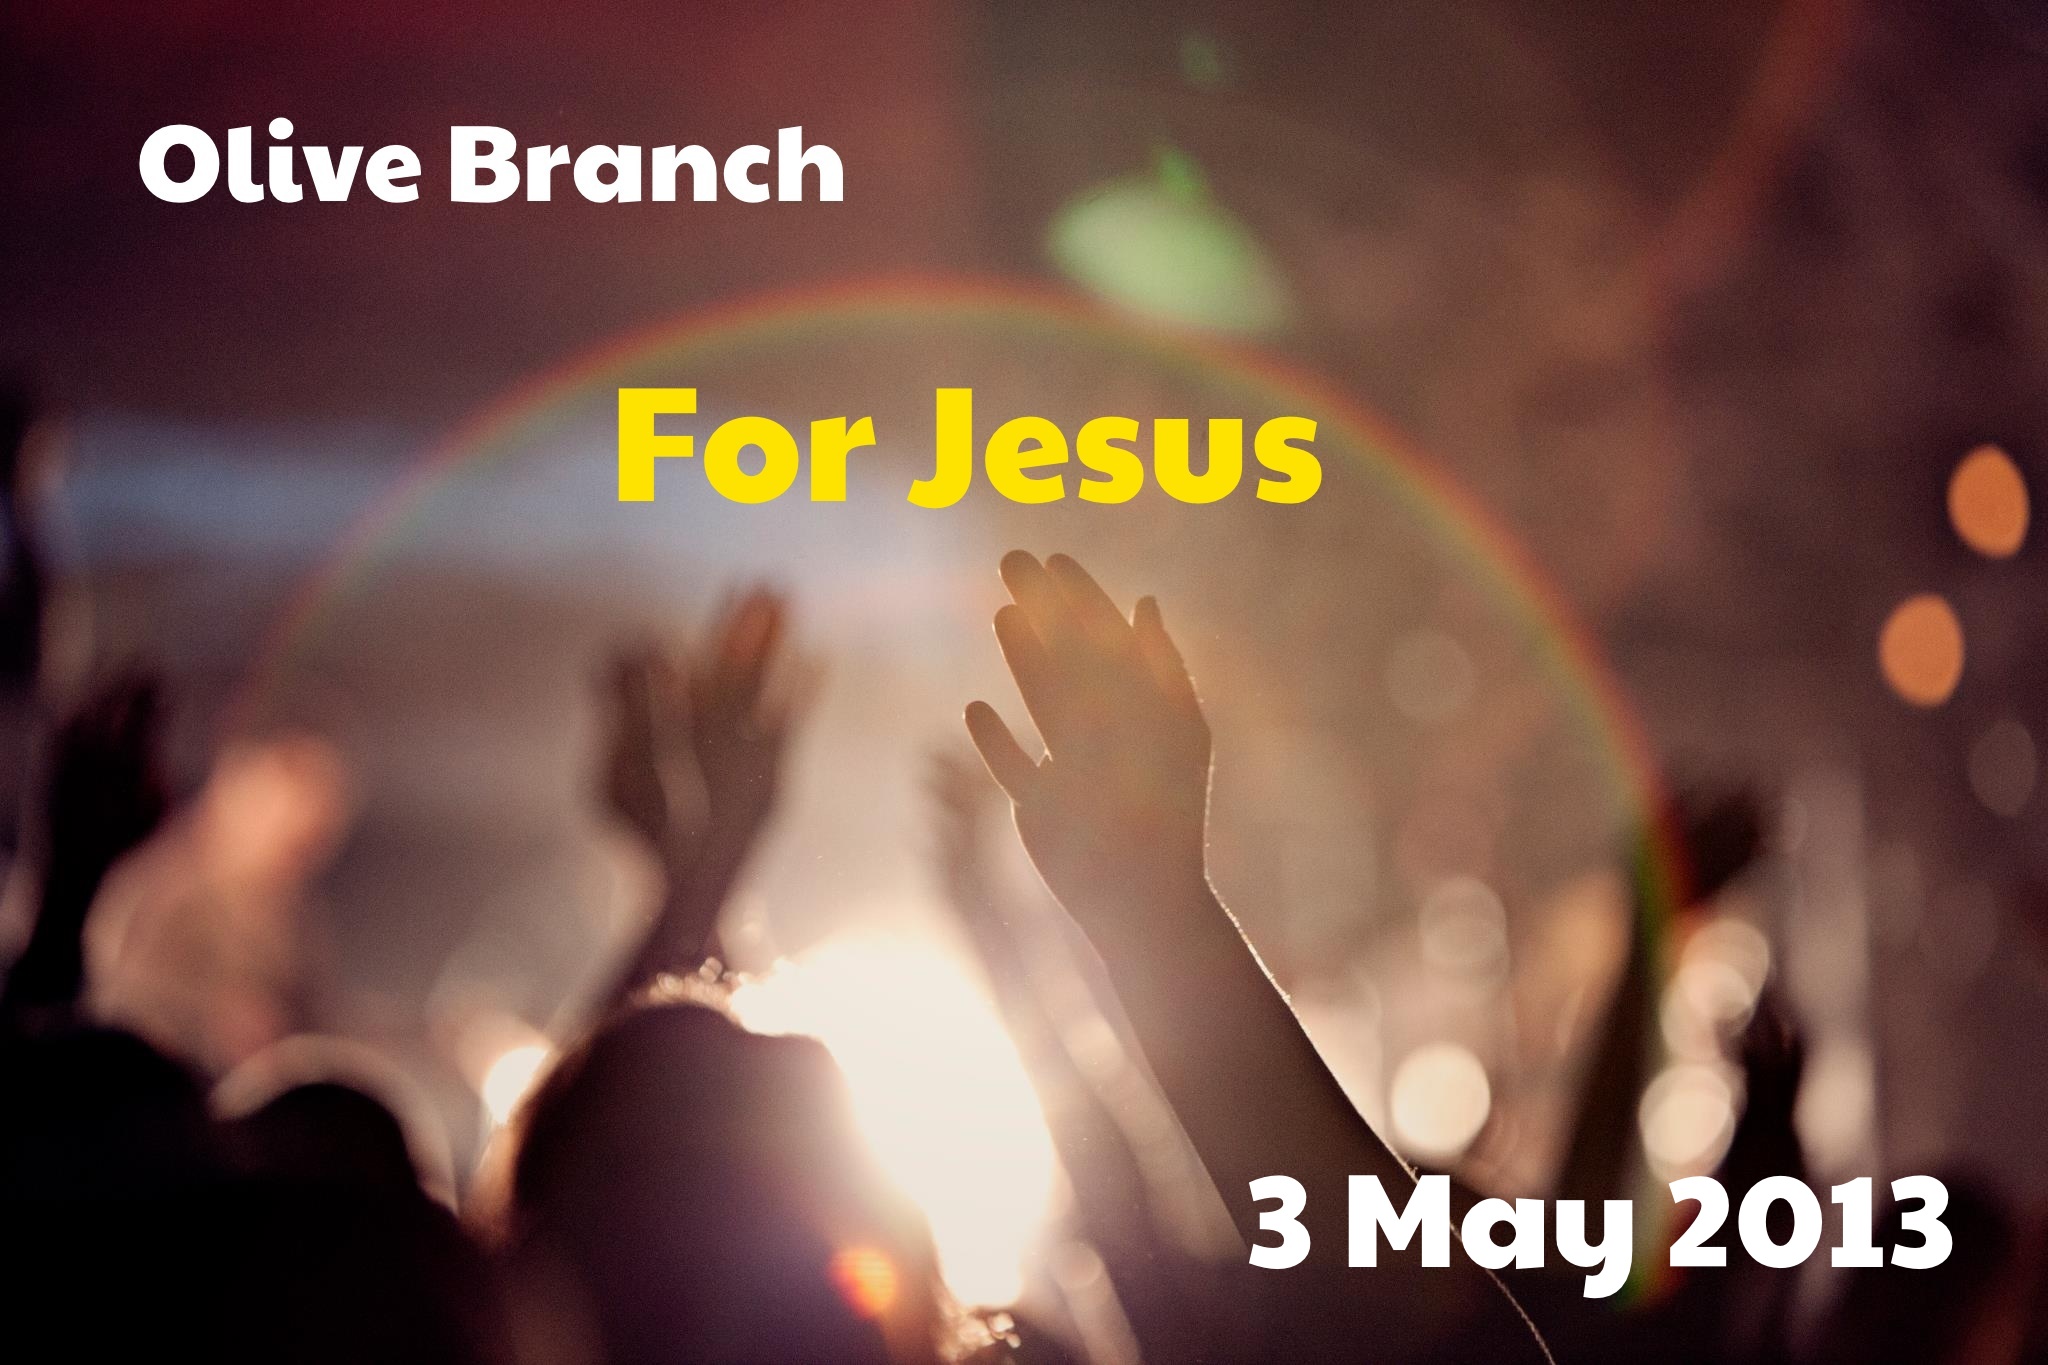 coming: Olive Branch For JESUS